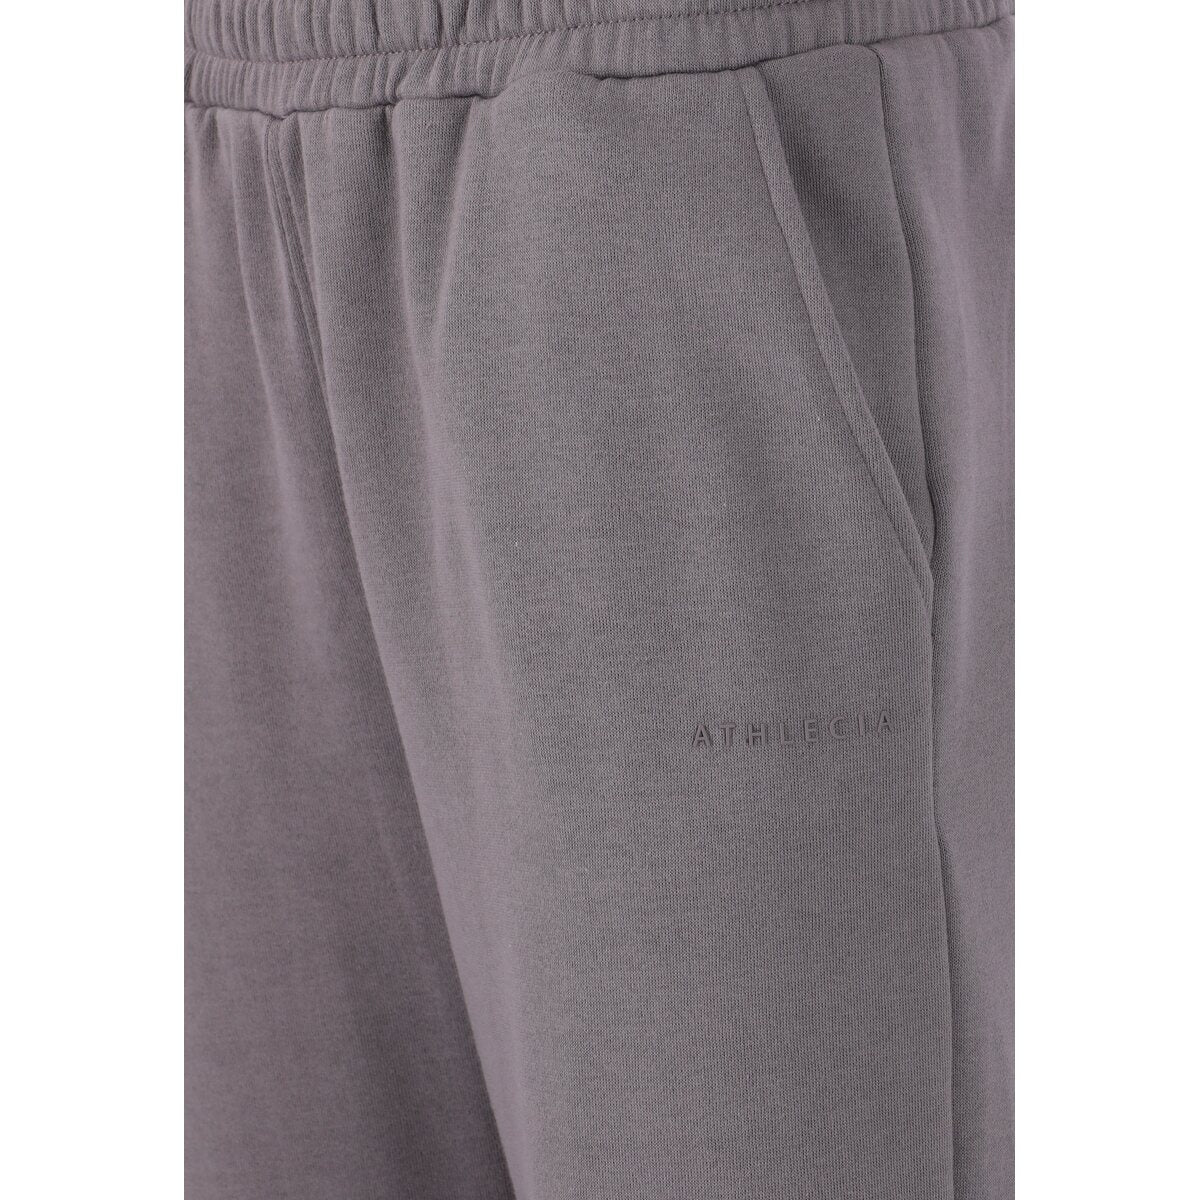 Athlecia Ruthie Womenswear Sweat Pants 8 Shaws Department Stores